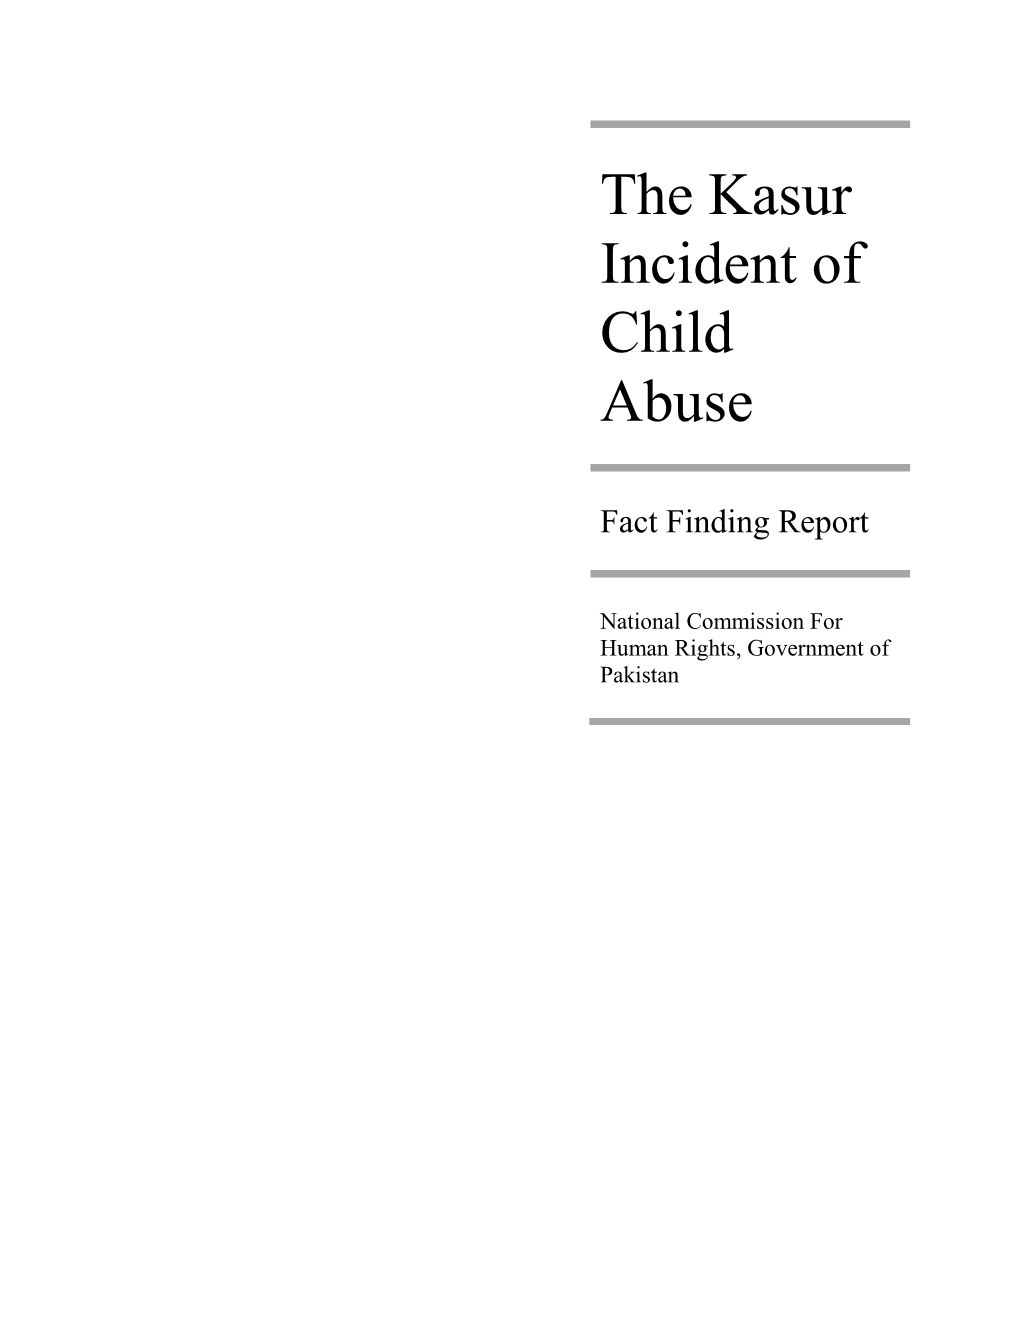 The Kasur Incident of Child Abuse